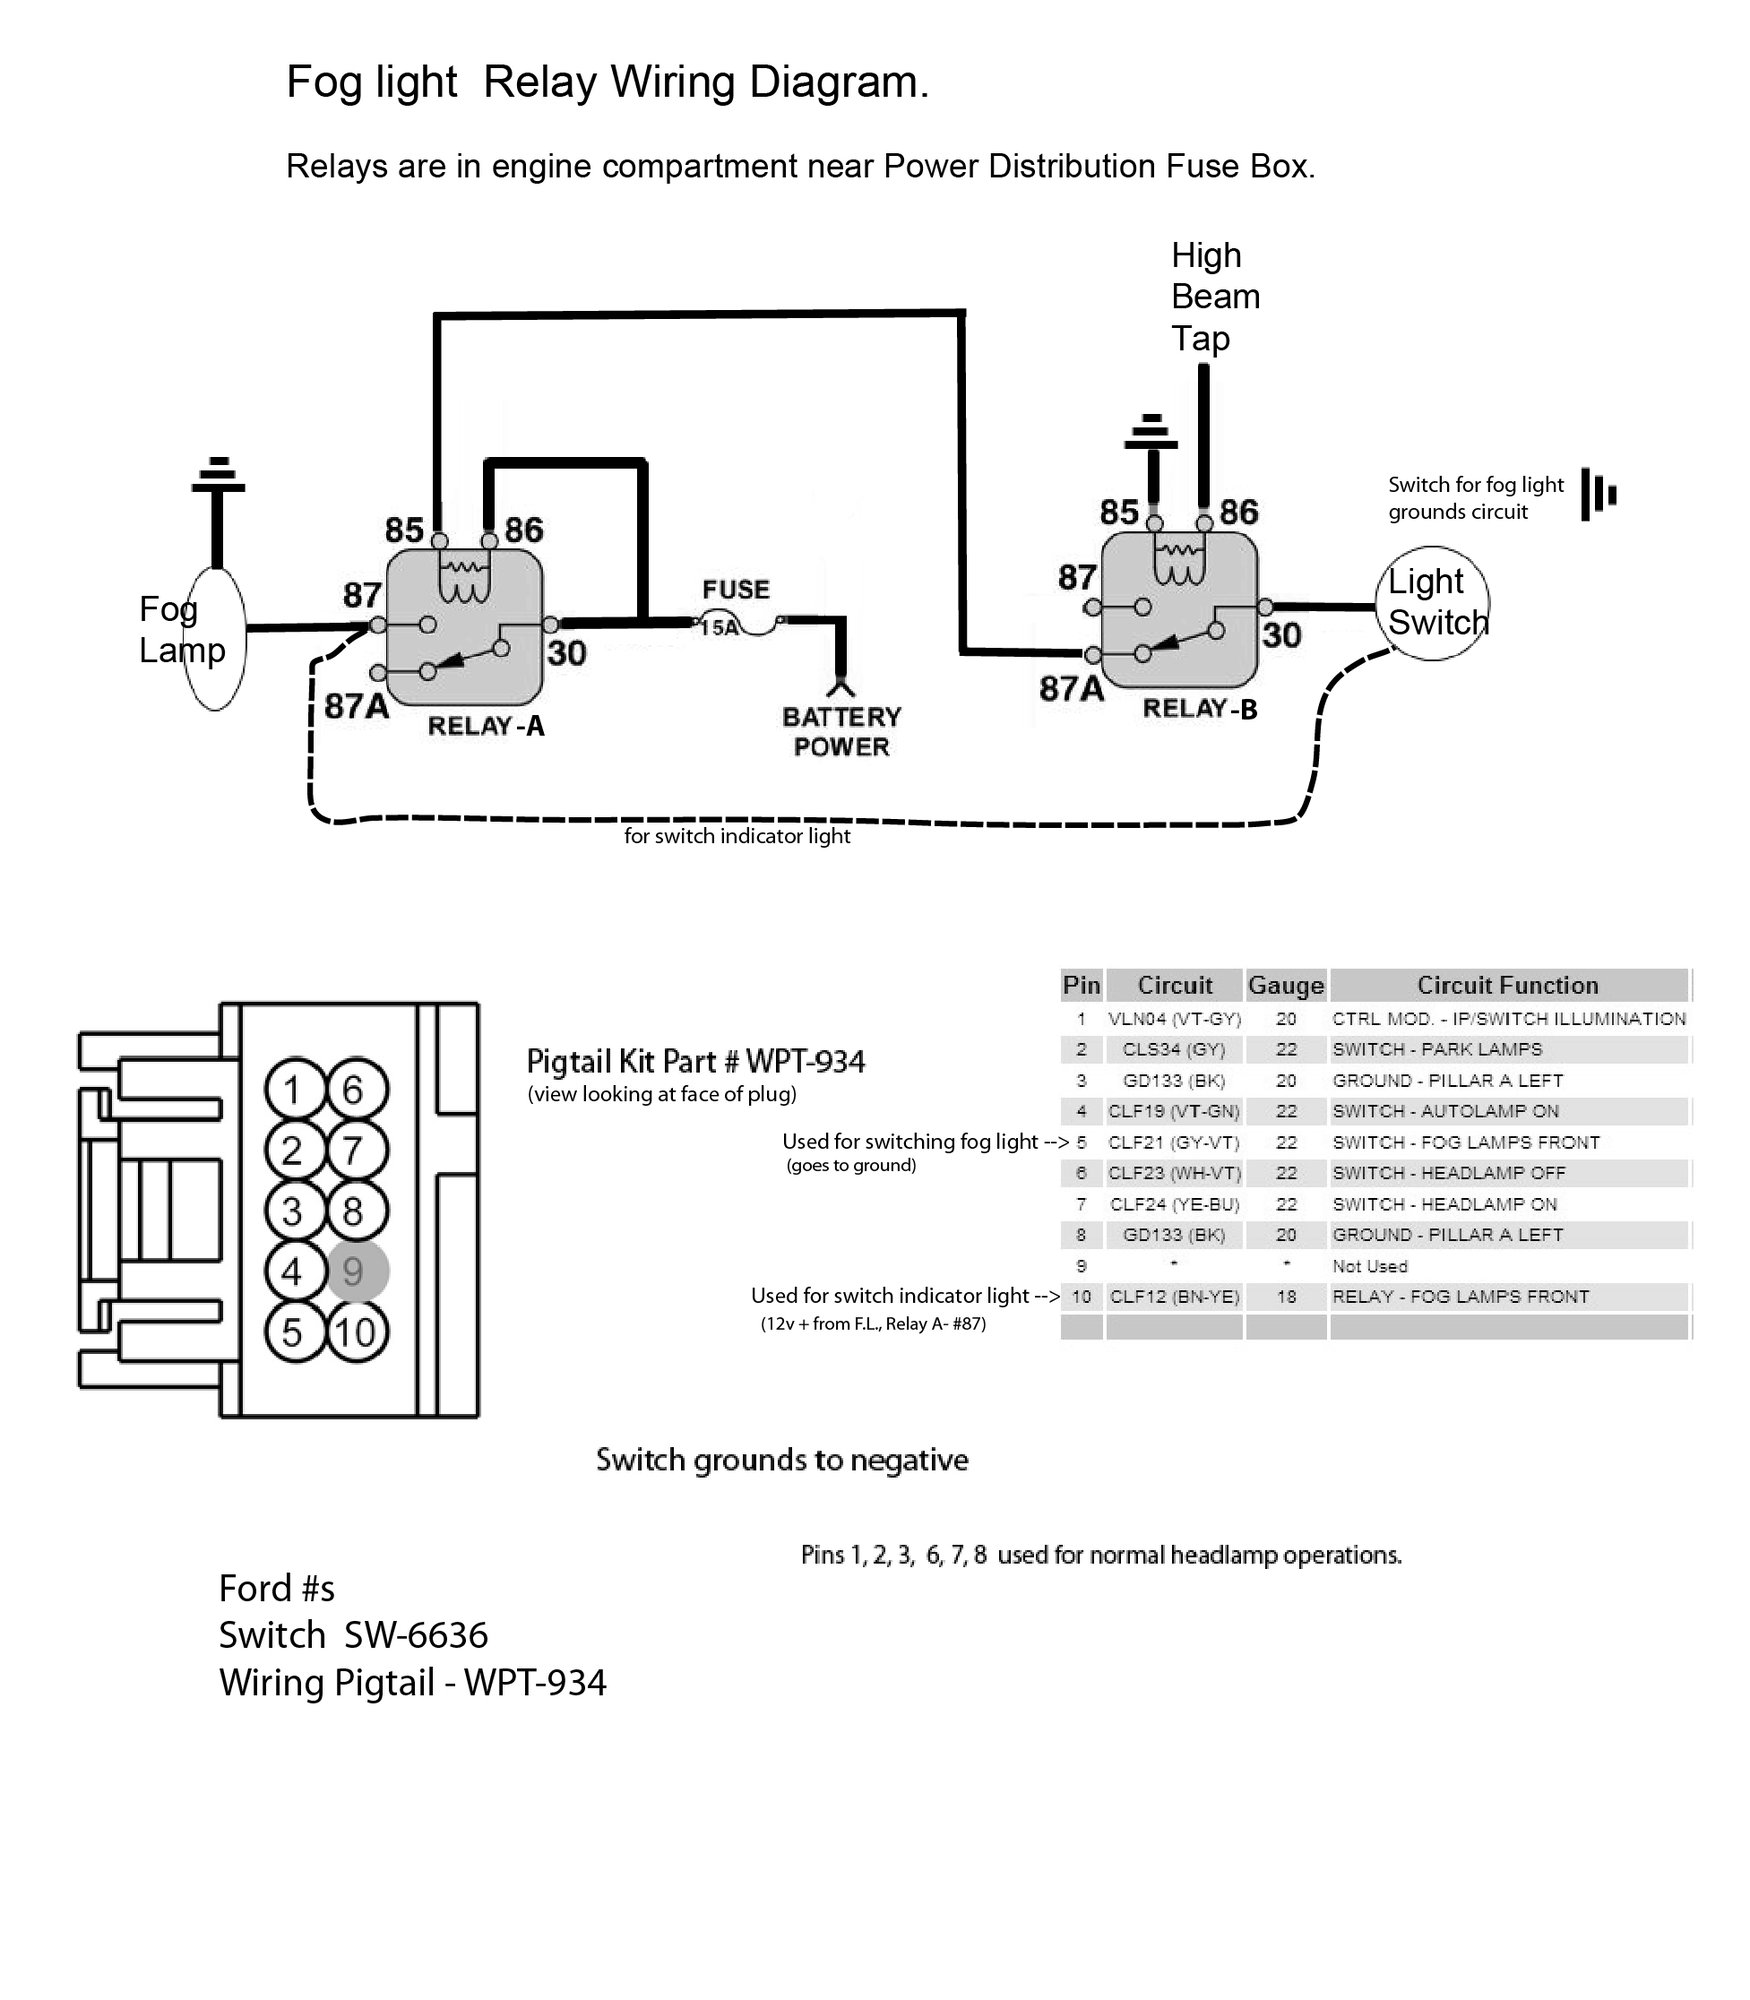 Fog Light On And Off Switch Wiring Diagram from cimg0.ibsrv.net